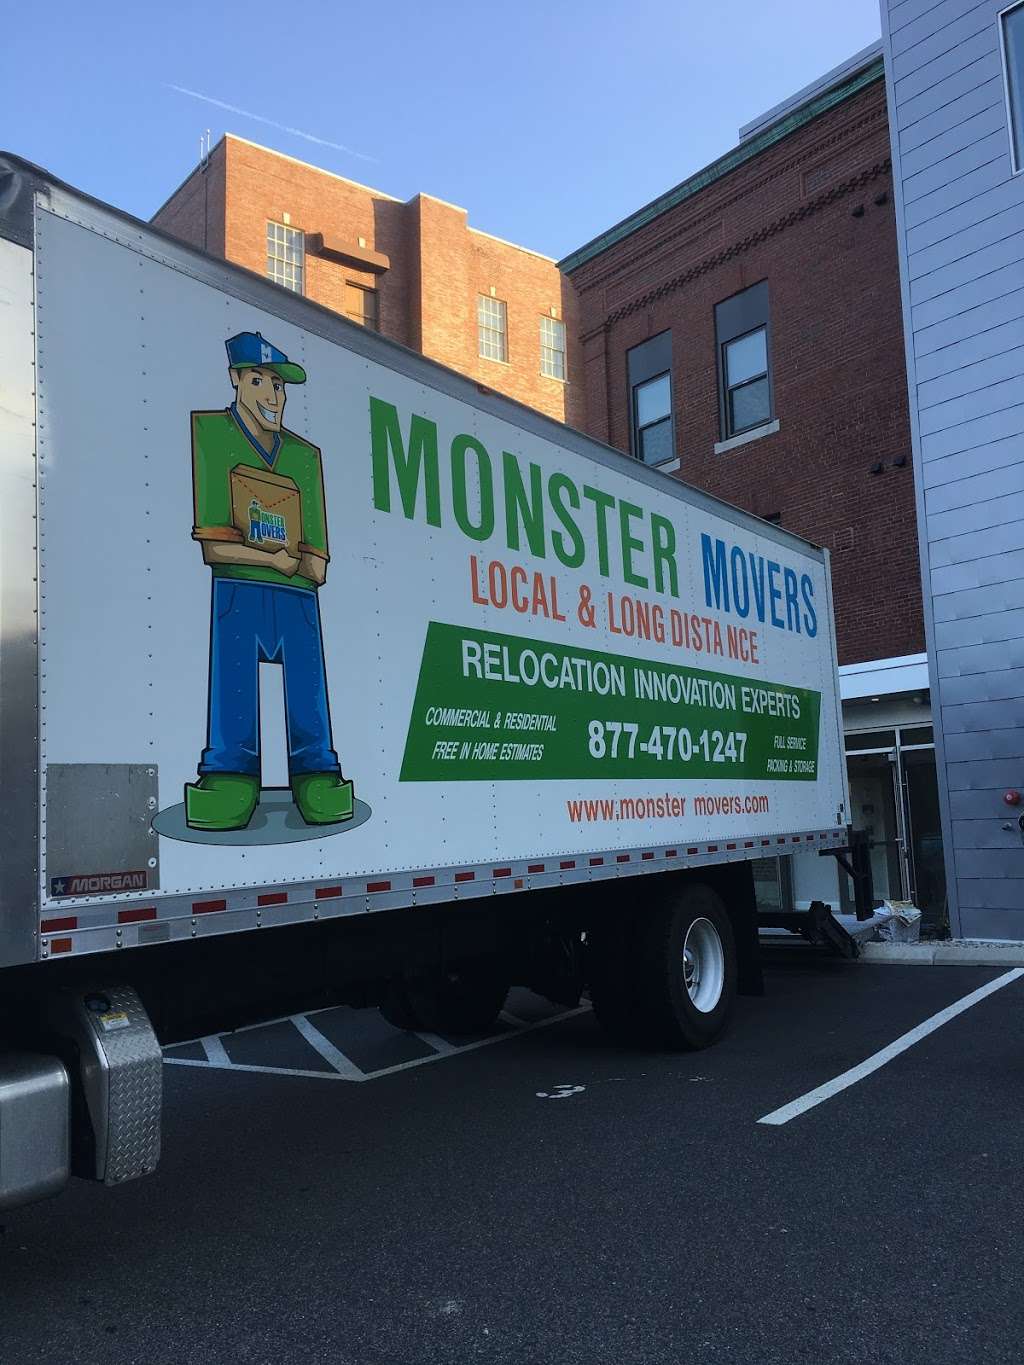 Dorchester Movers | Long Distance Movers | Monster Movers | 11 Hartford St, Dorchester, MA 02125 | Phone: (877) 470-1247